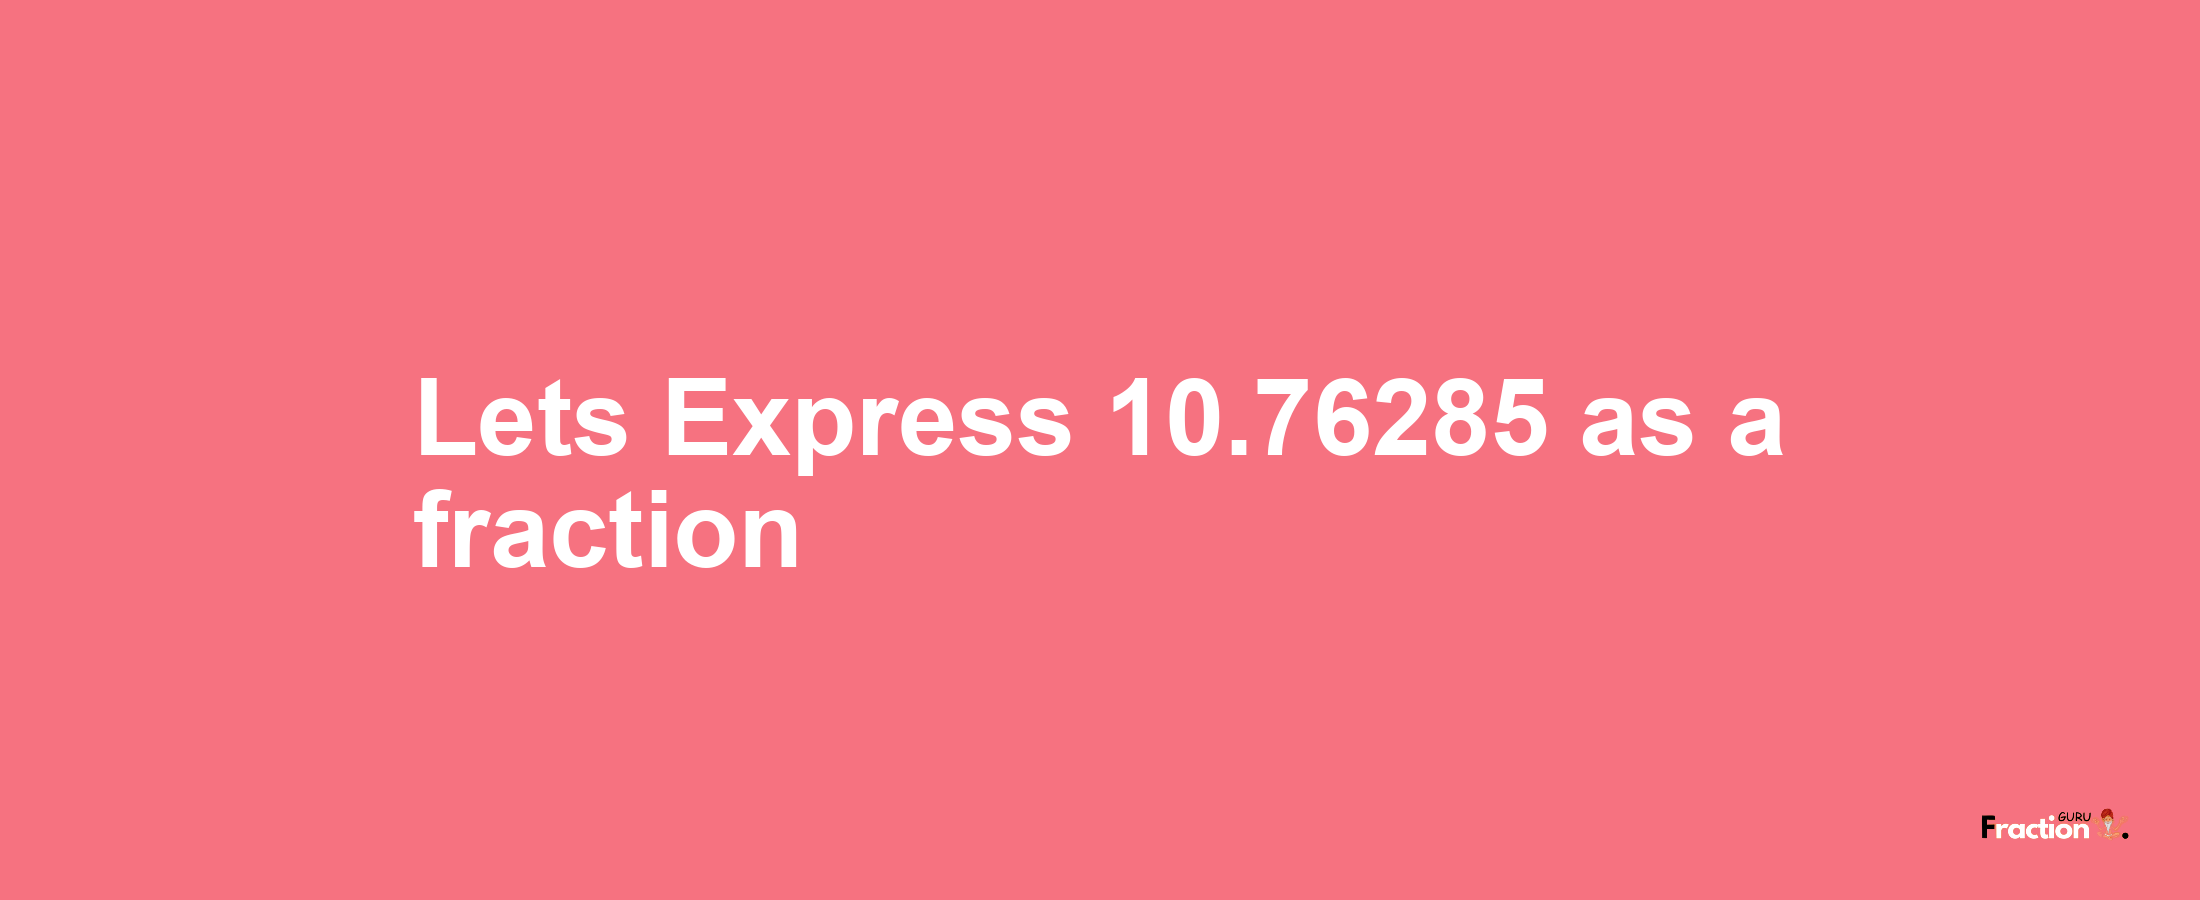 Lets Express 10.76285 as afraction